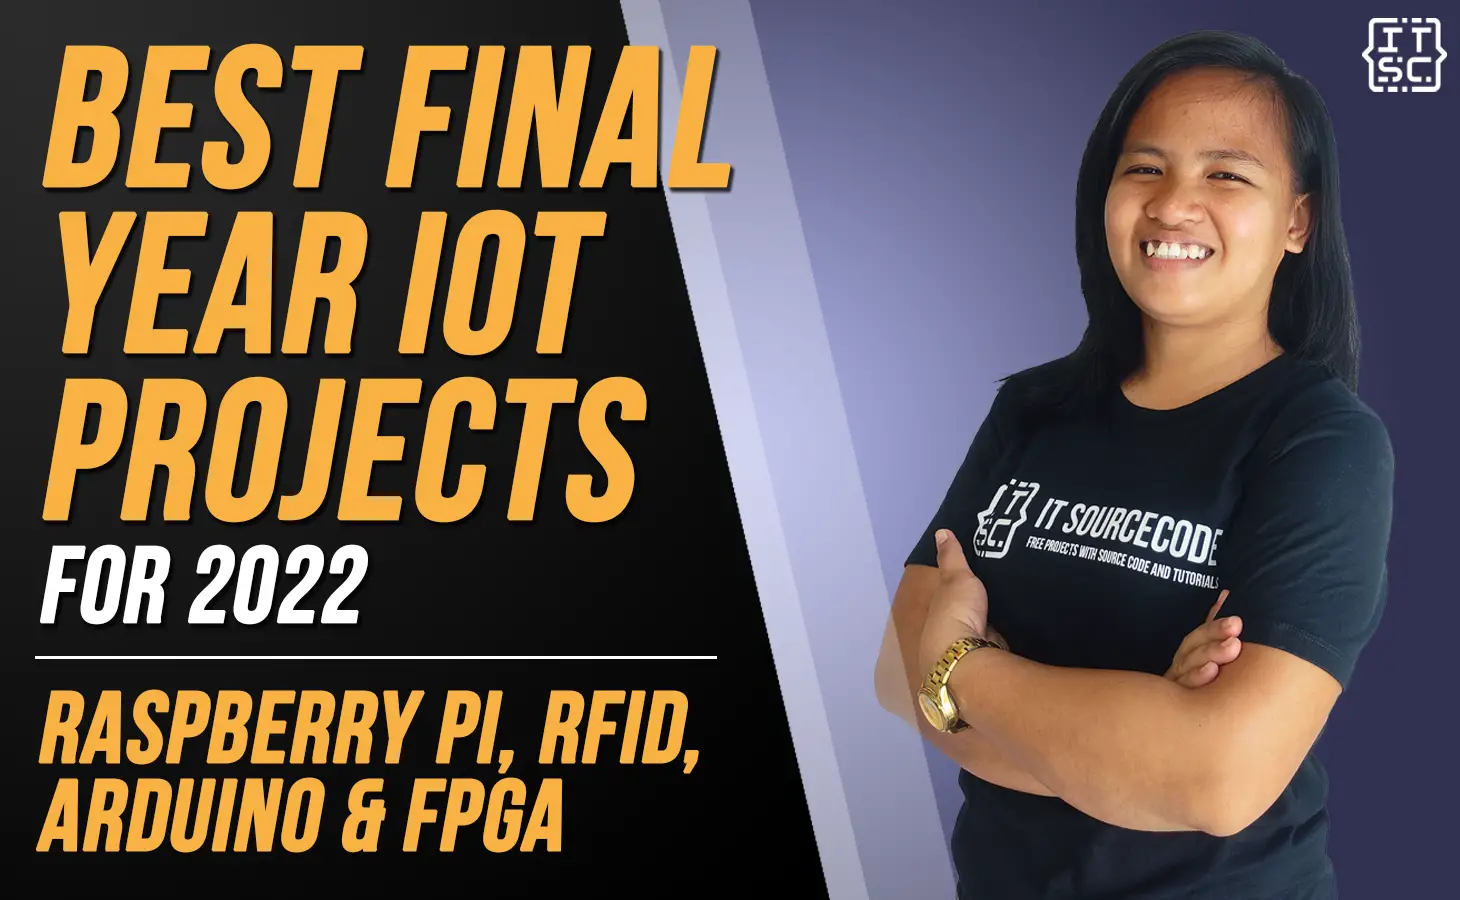 BEST FINAL YEAR IOT PROJECTS FOR 2022